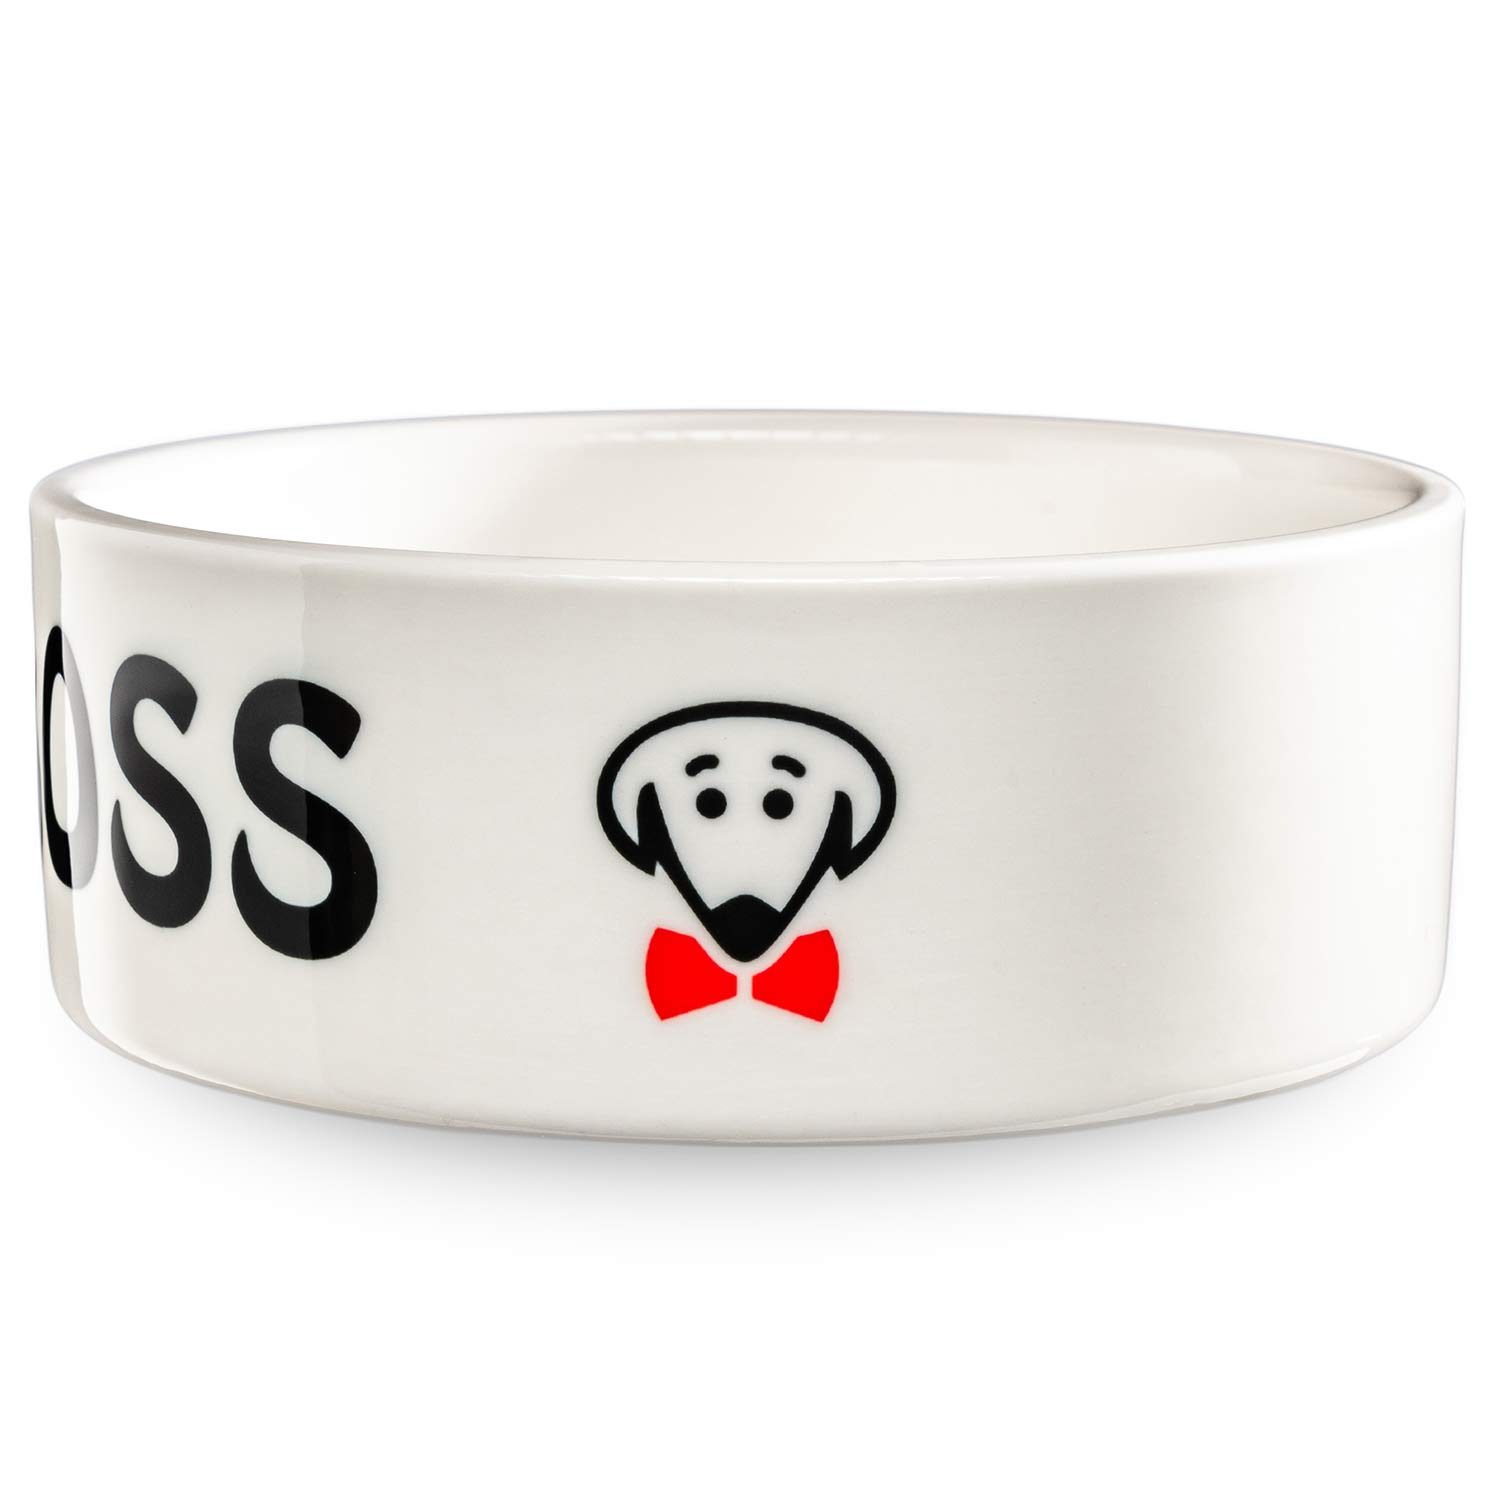 The Boss pet bowl in white by Beau Tyler